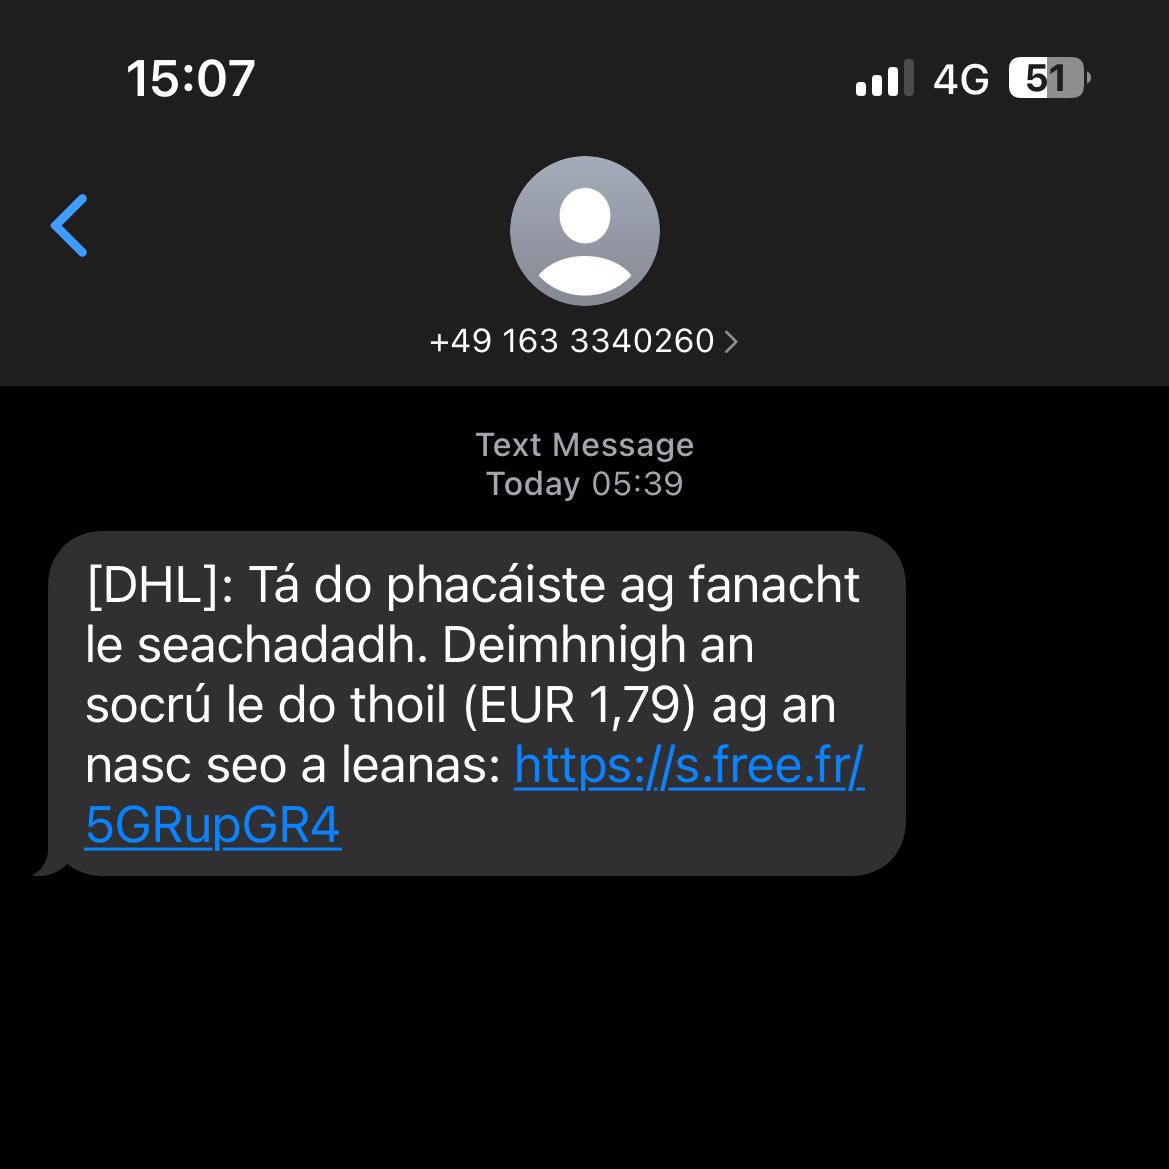 love the as gaeilge scam messages lately